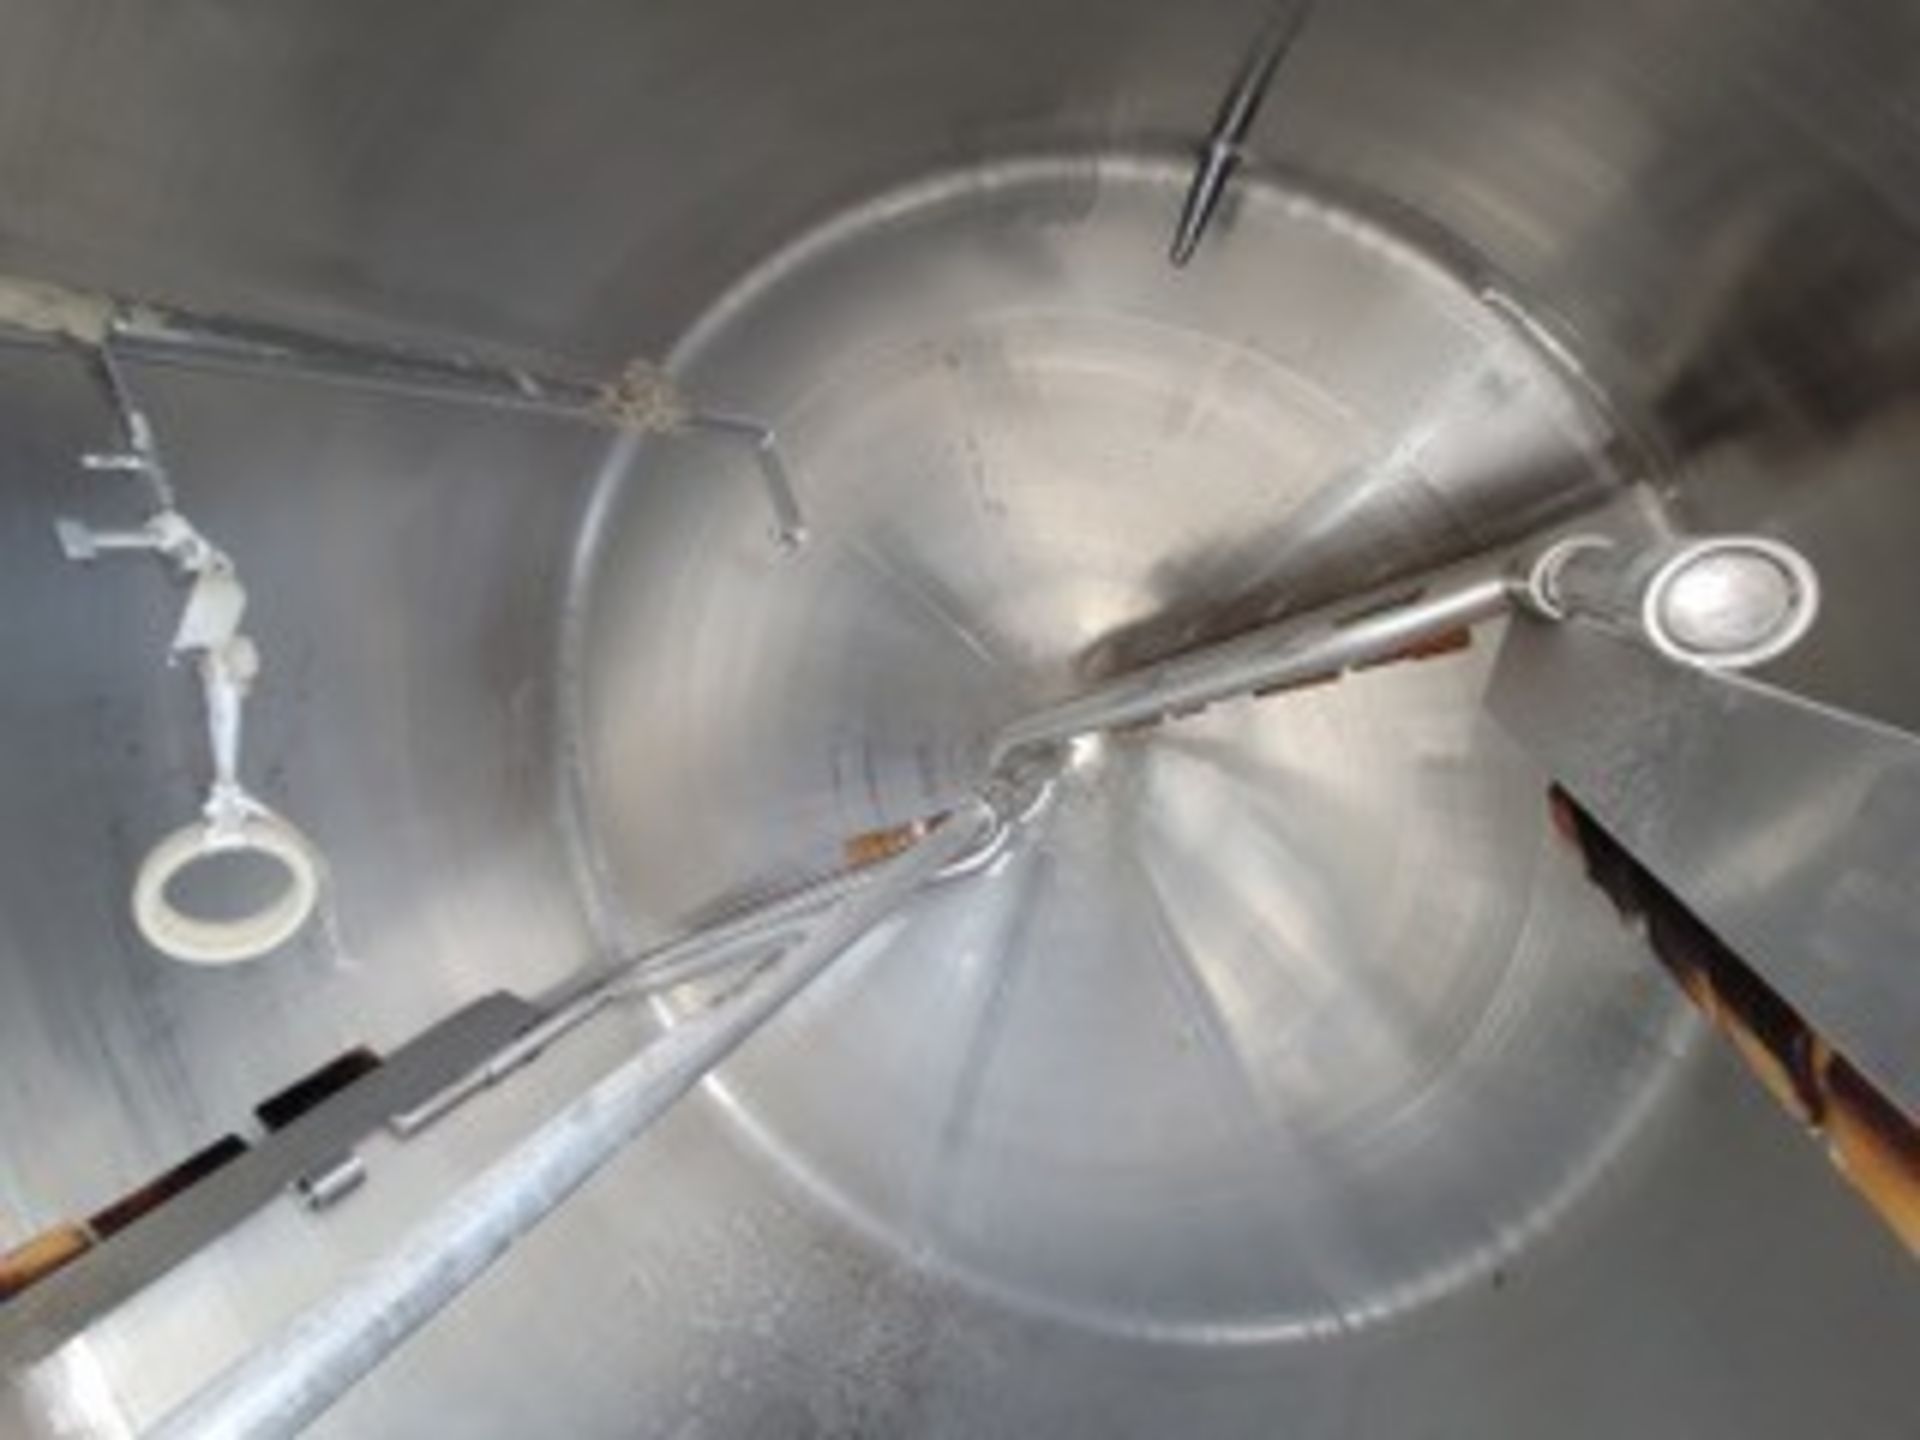 Paul Mueller Aprox. 500 Gallon S/S Steam Jacketed Cone Bottom Processor with Scrape Surface - Image 4 of 4